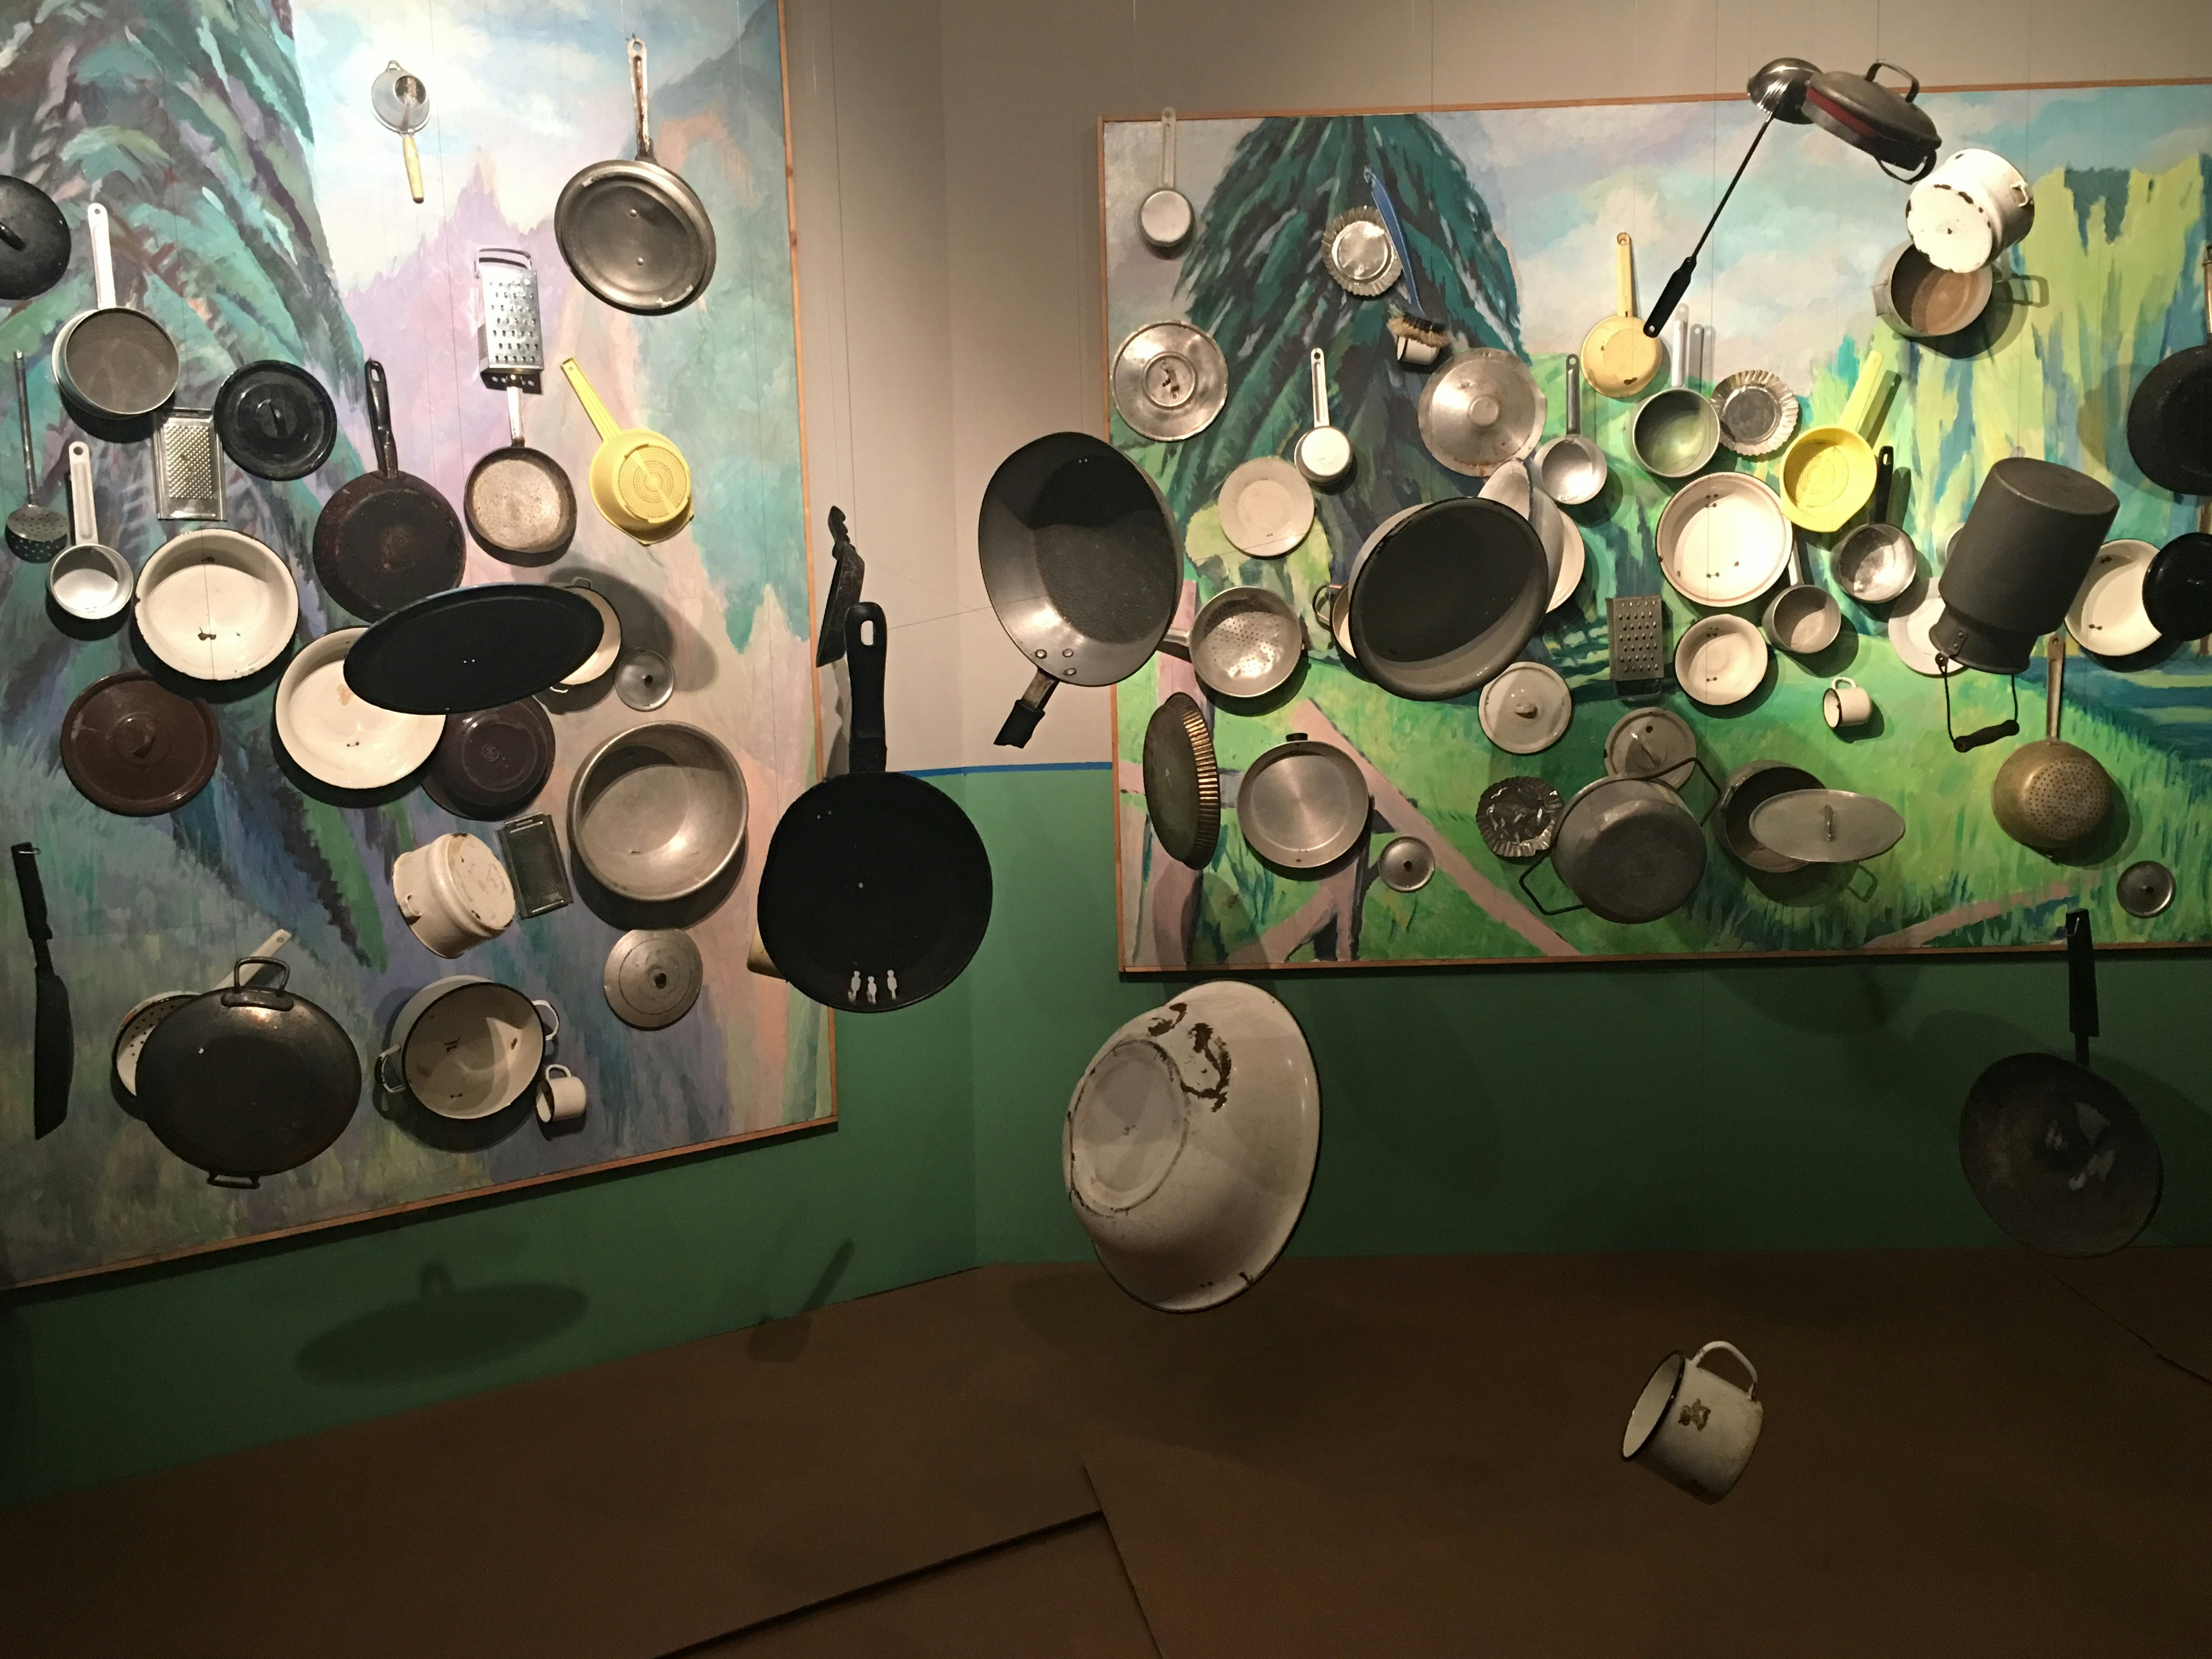 A series of suspended pots, pans and other enamel kitchenware, hanging in front of two large impressionistic landscape paintings.